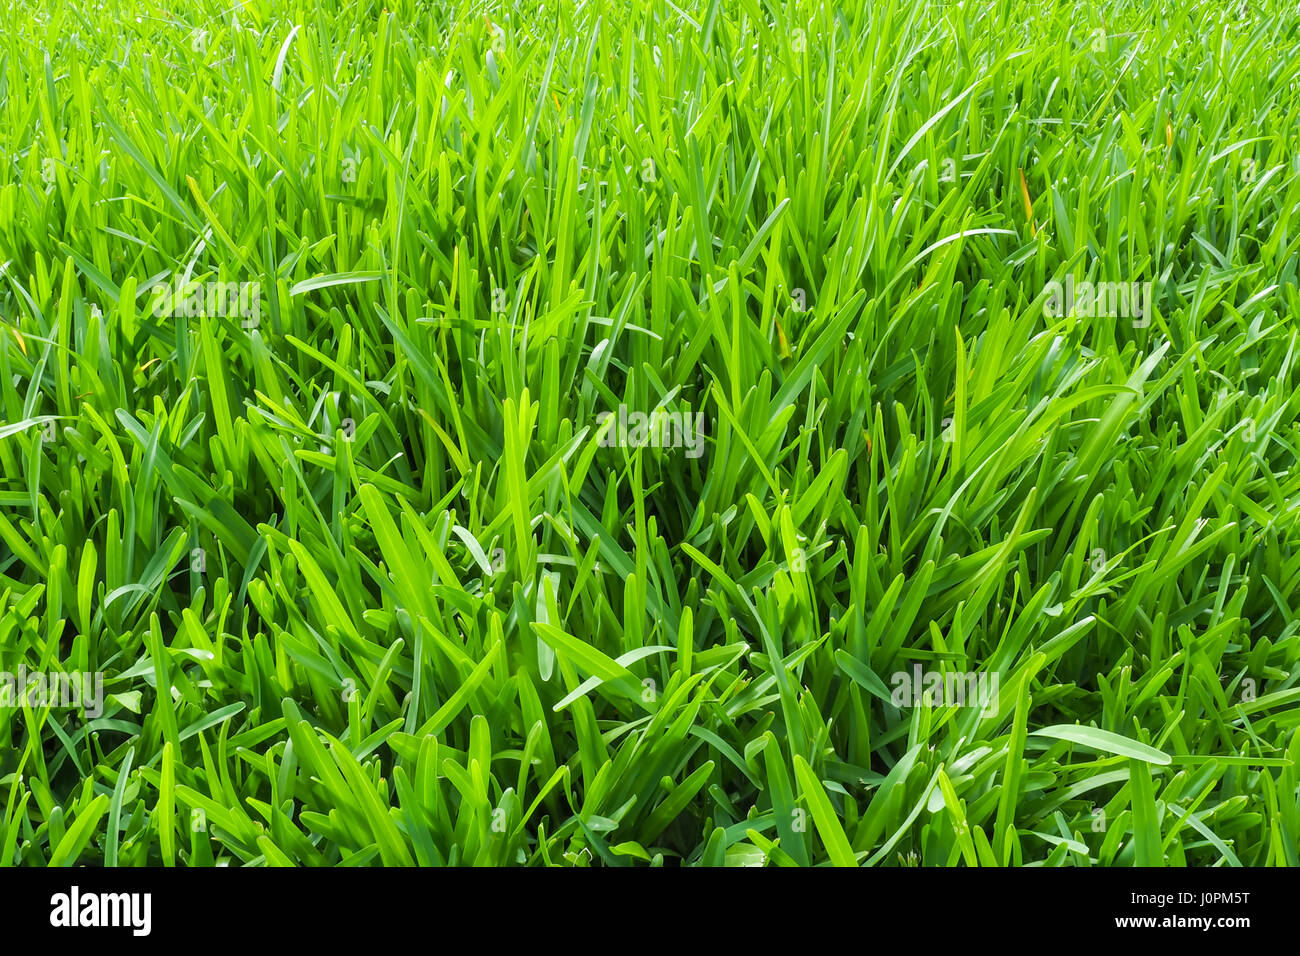 A section of long green lawn grass, close-up. Stock Photo